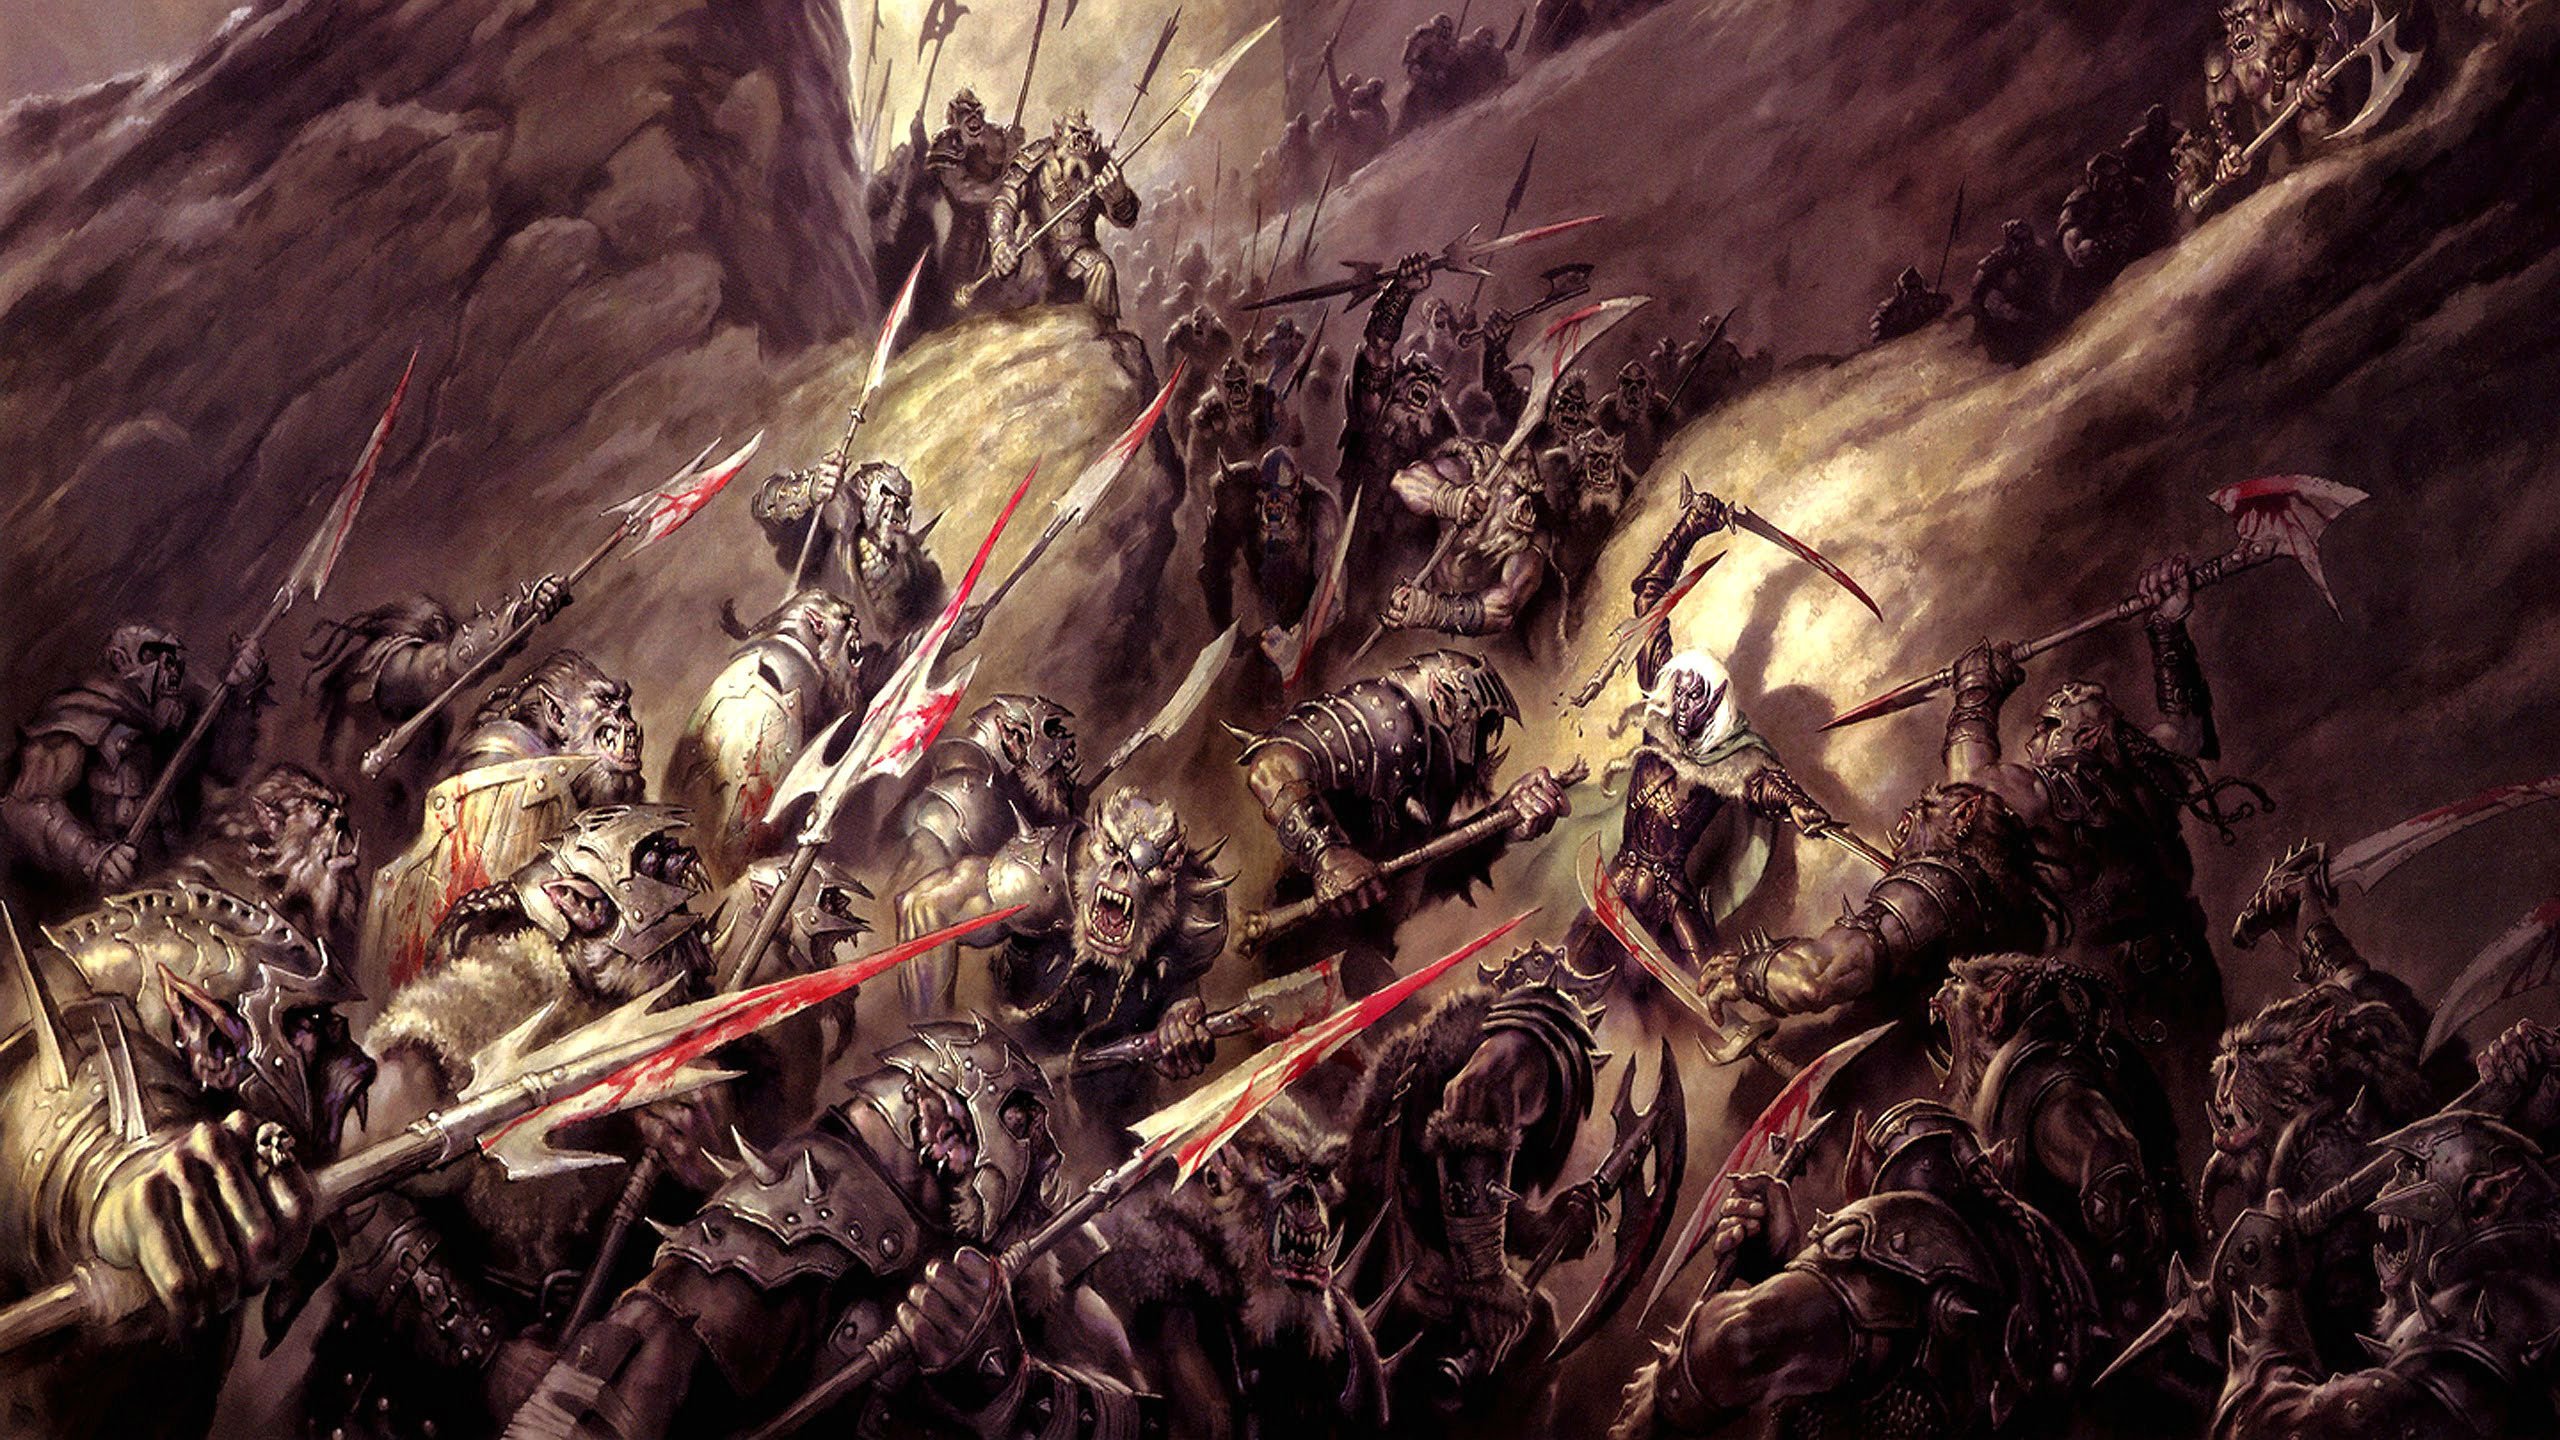 Download hd wallpapers of 821076-dungeons, Dragons, Forgotten, Realms, Magi...